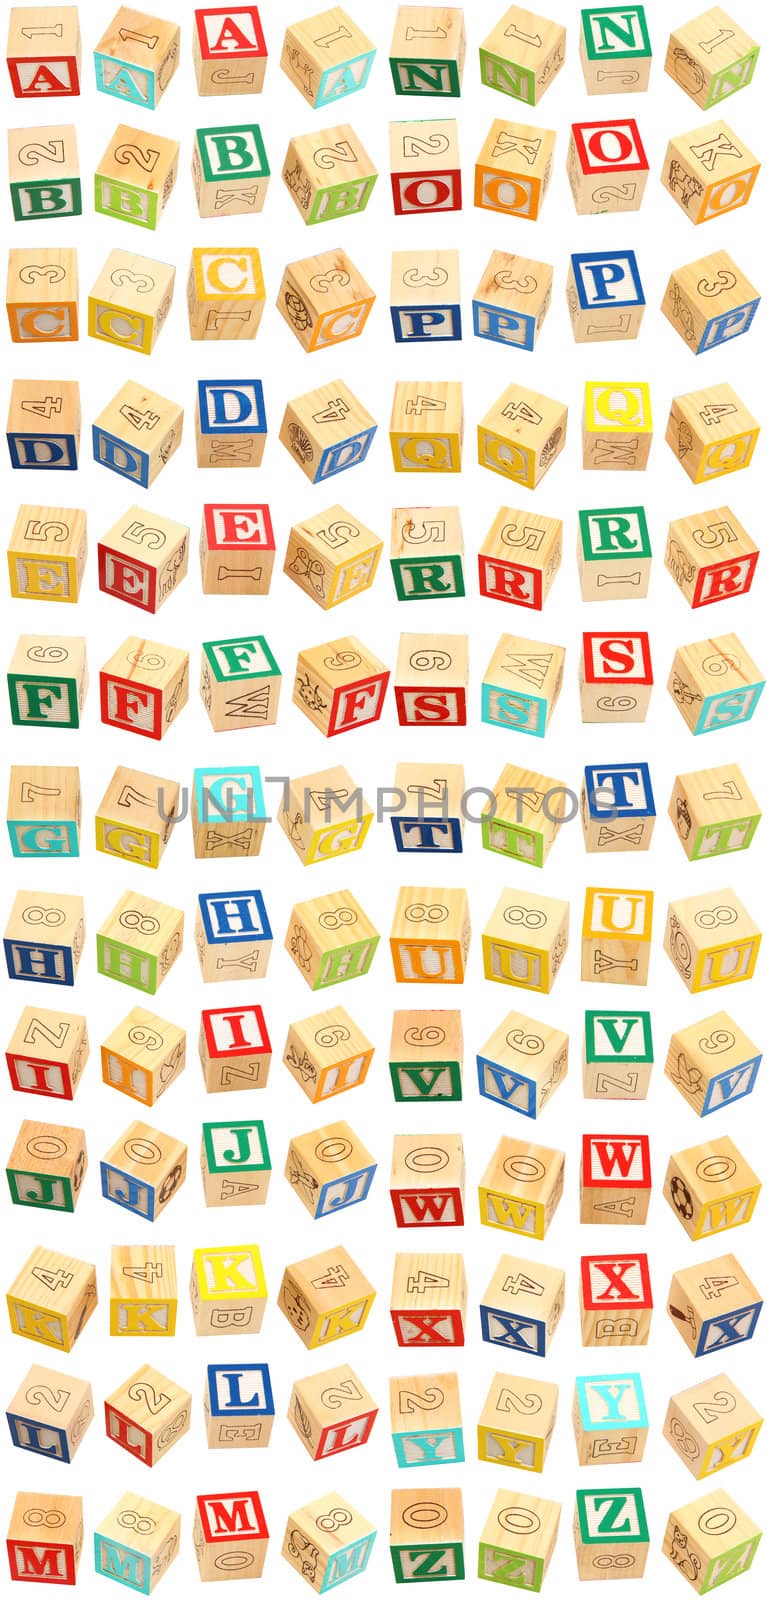 Colorful alphabet blocks with letters A through Z.